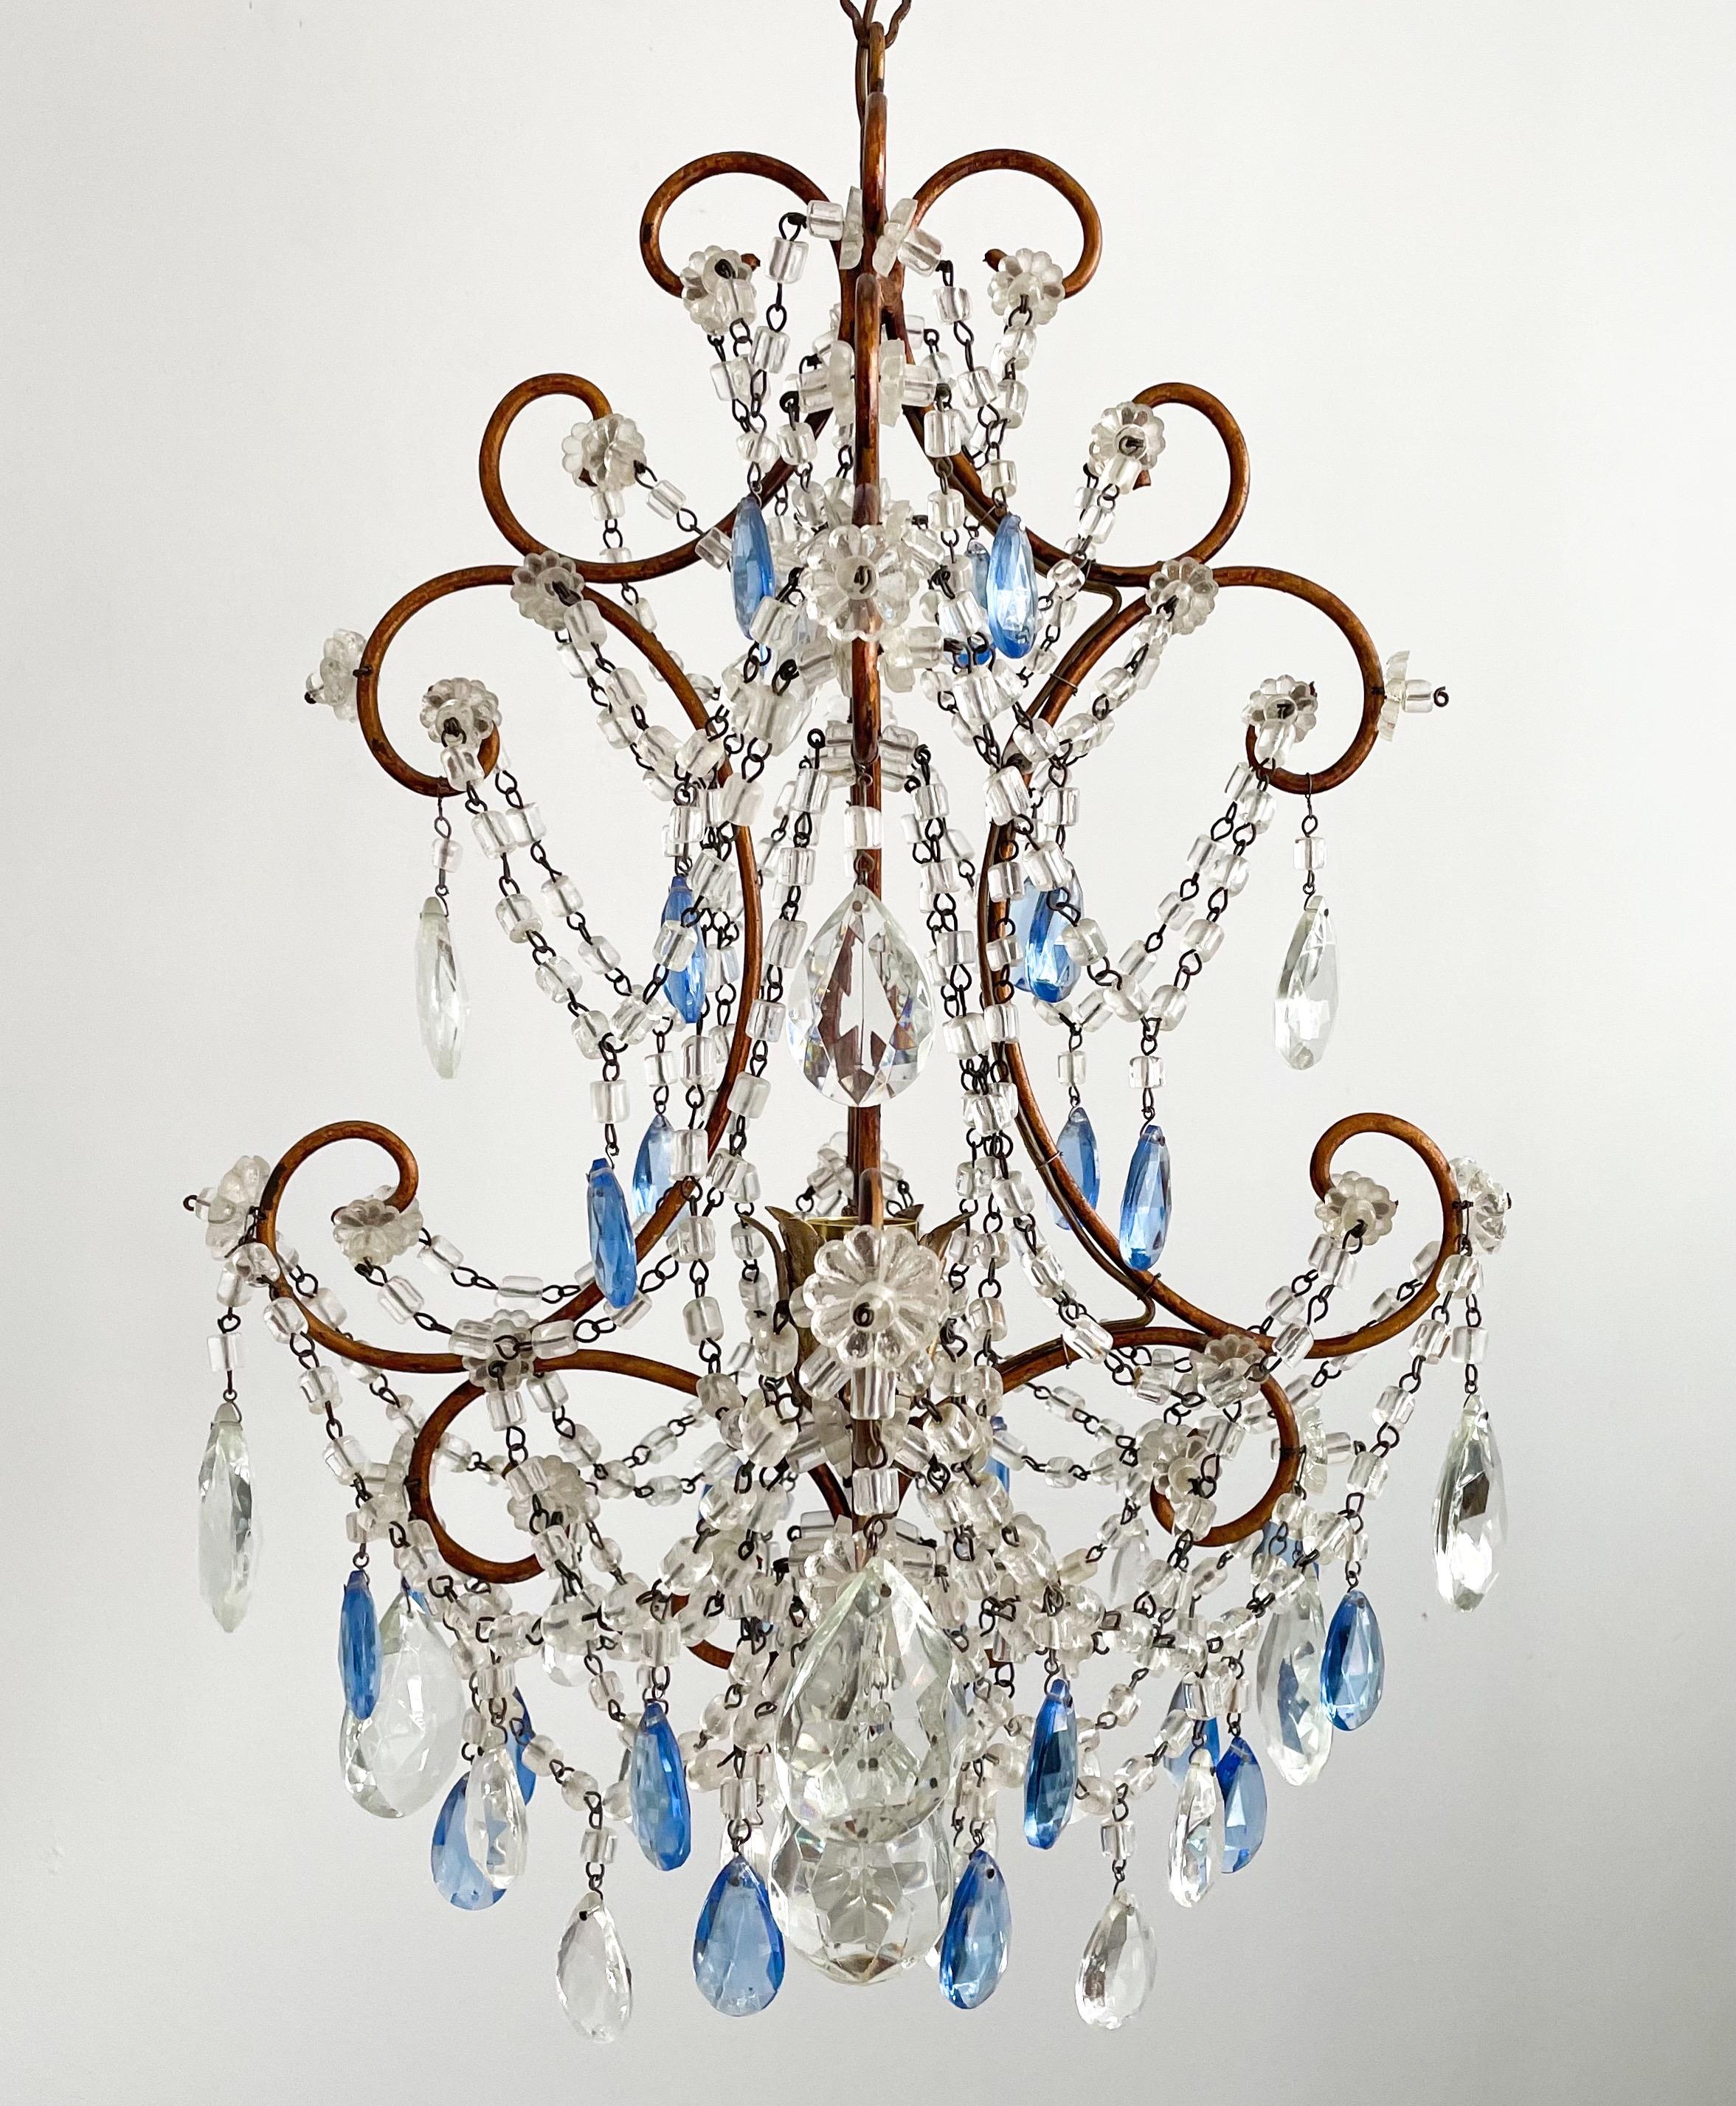 Beautiful, 1950s Italian gilt-iron crystal beaded chandelier.
 This small-scale chandelier consists of a scrolled, gilded iron frame which has been decorated with an abundance of “macaroni” glass beads and faceted prisms in clear and royal blue